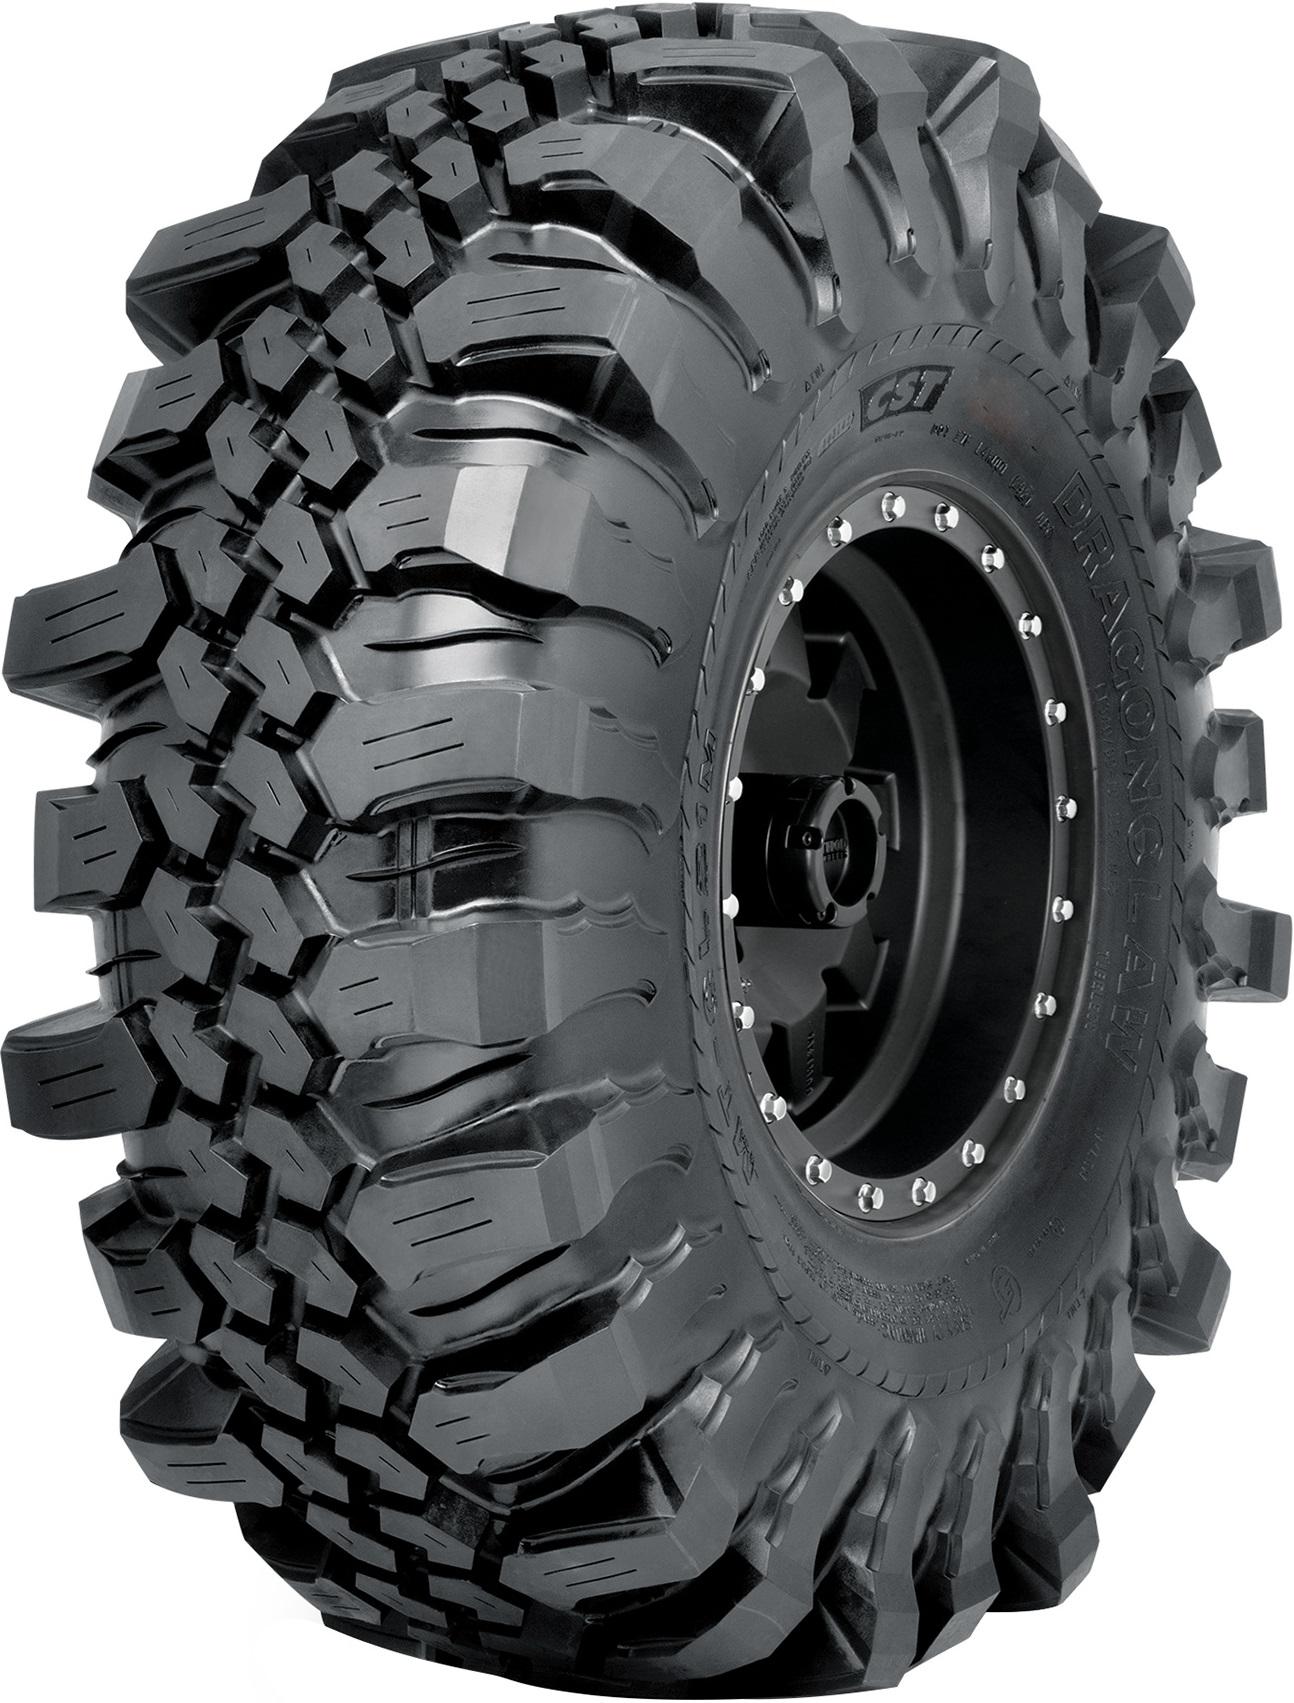 CST Dragon Claw CL21M Tyres